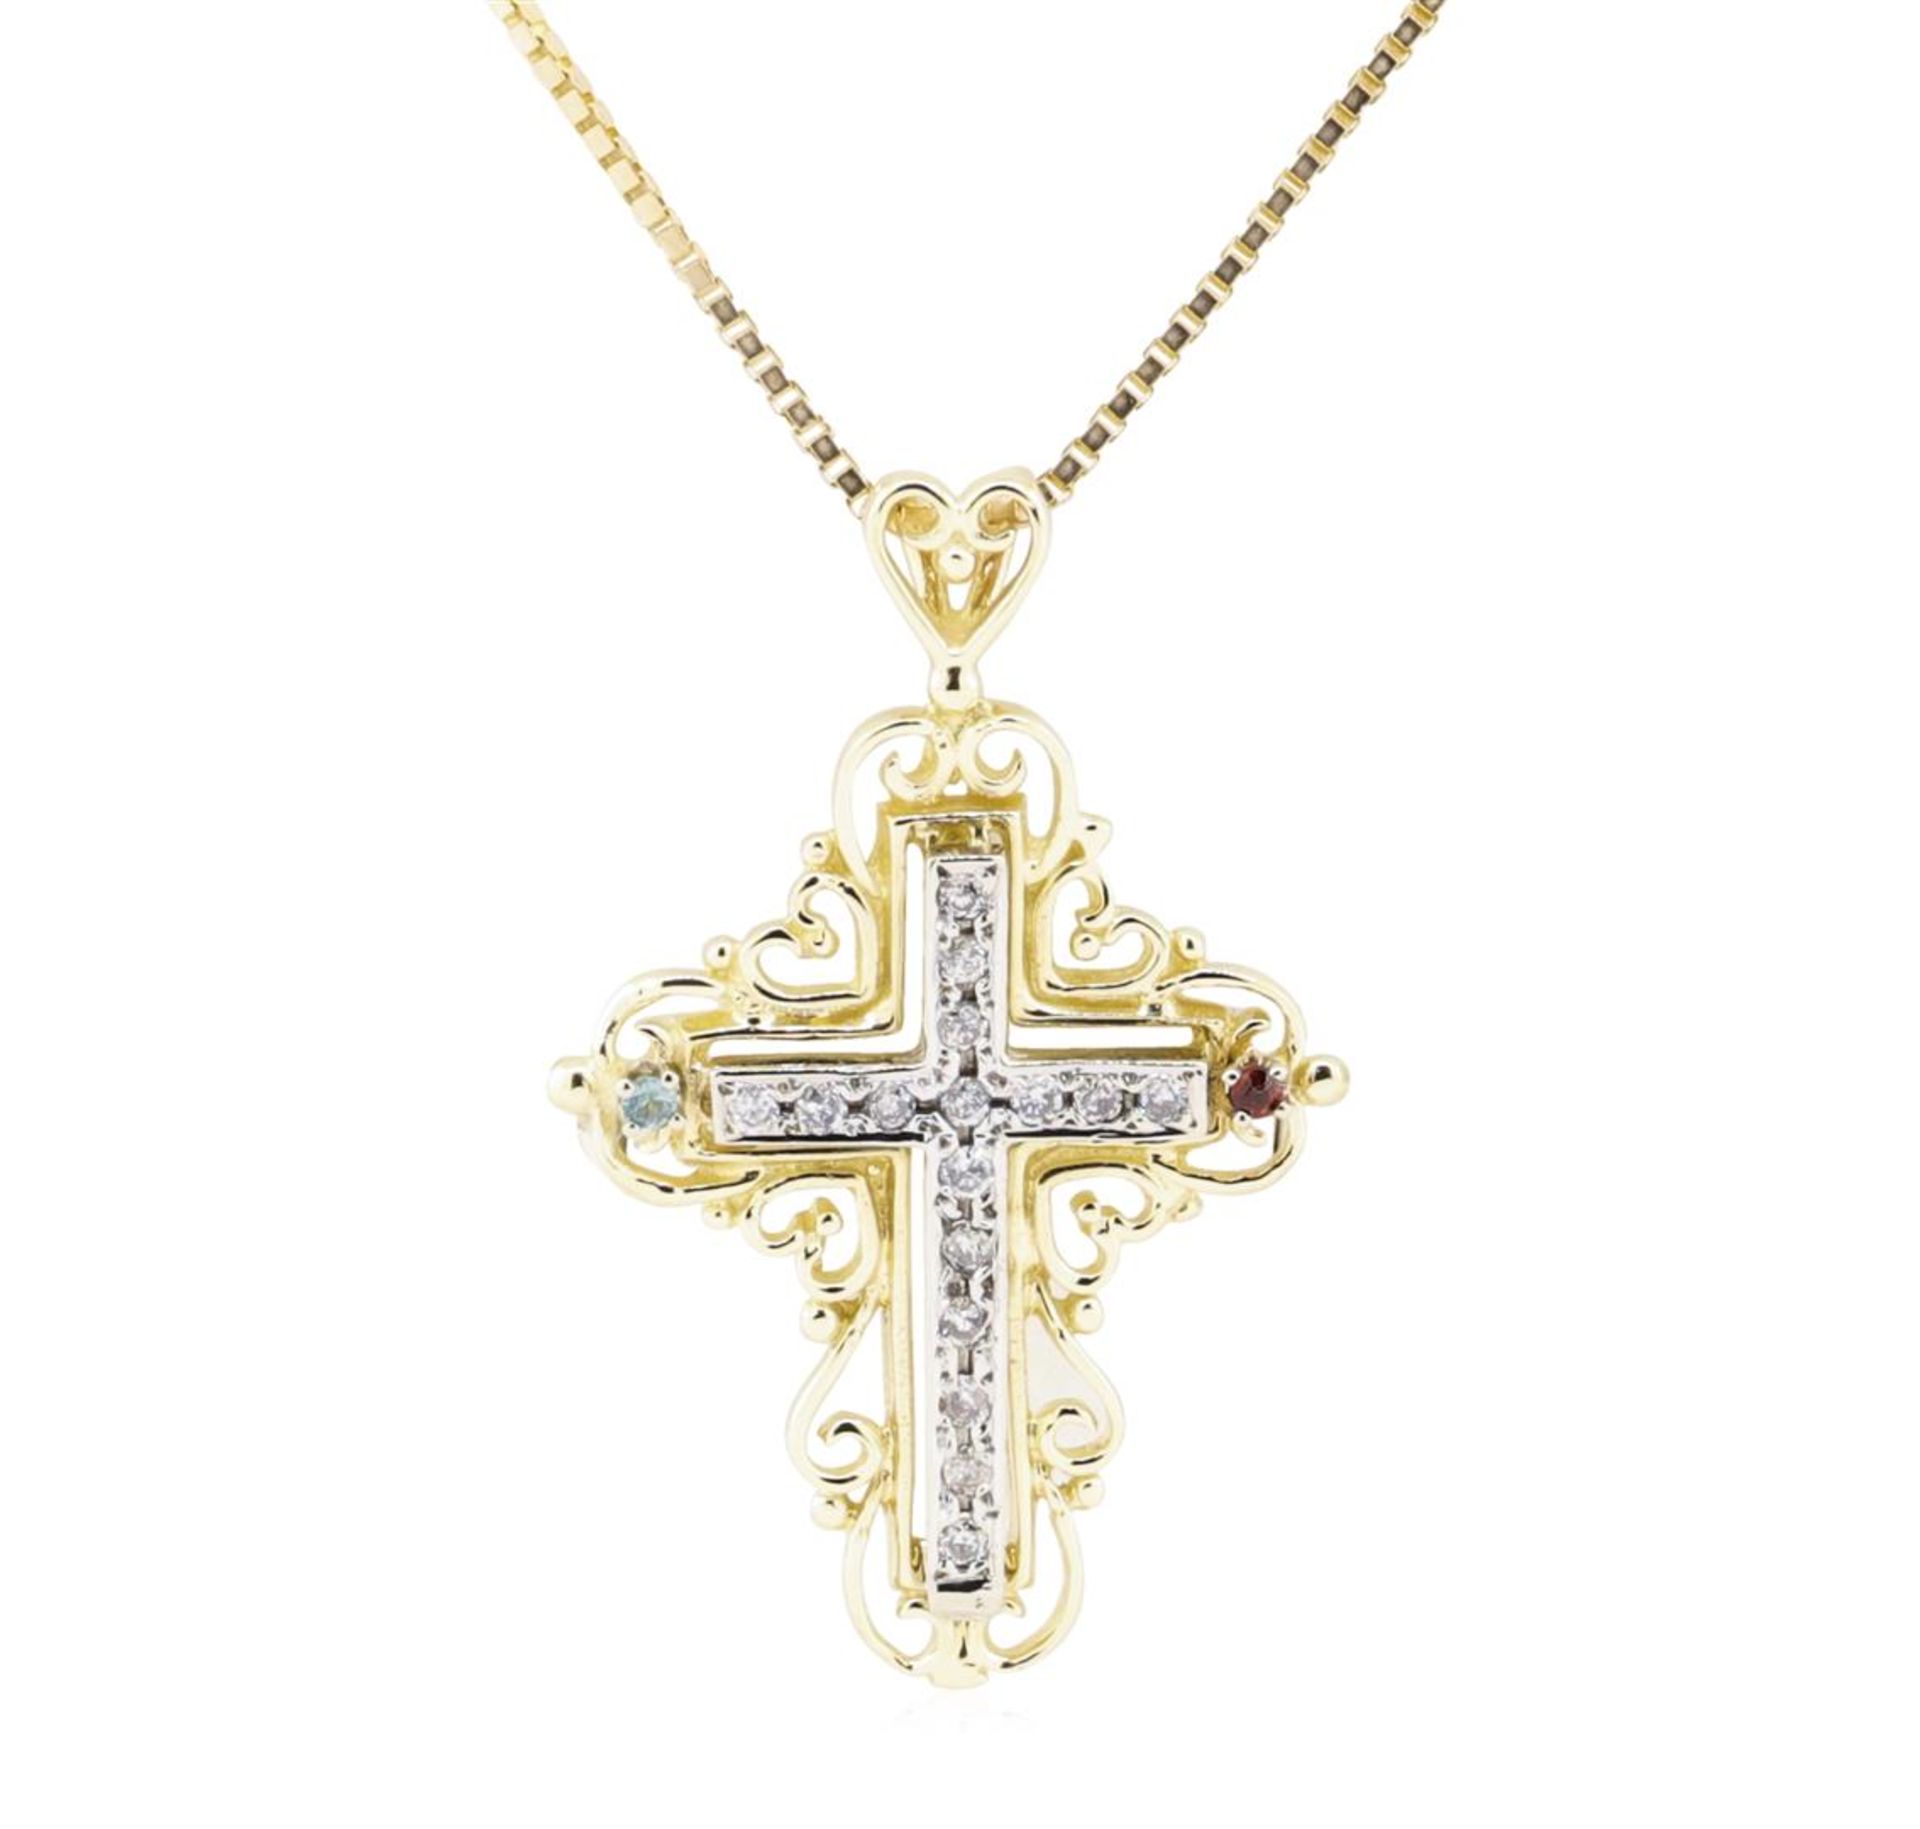 0.18 ctw Diamond Cross Pendant with Chain - 14KT Yellow and White Gold - Image 2 of 2